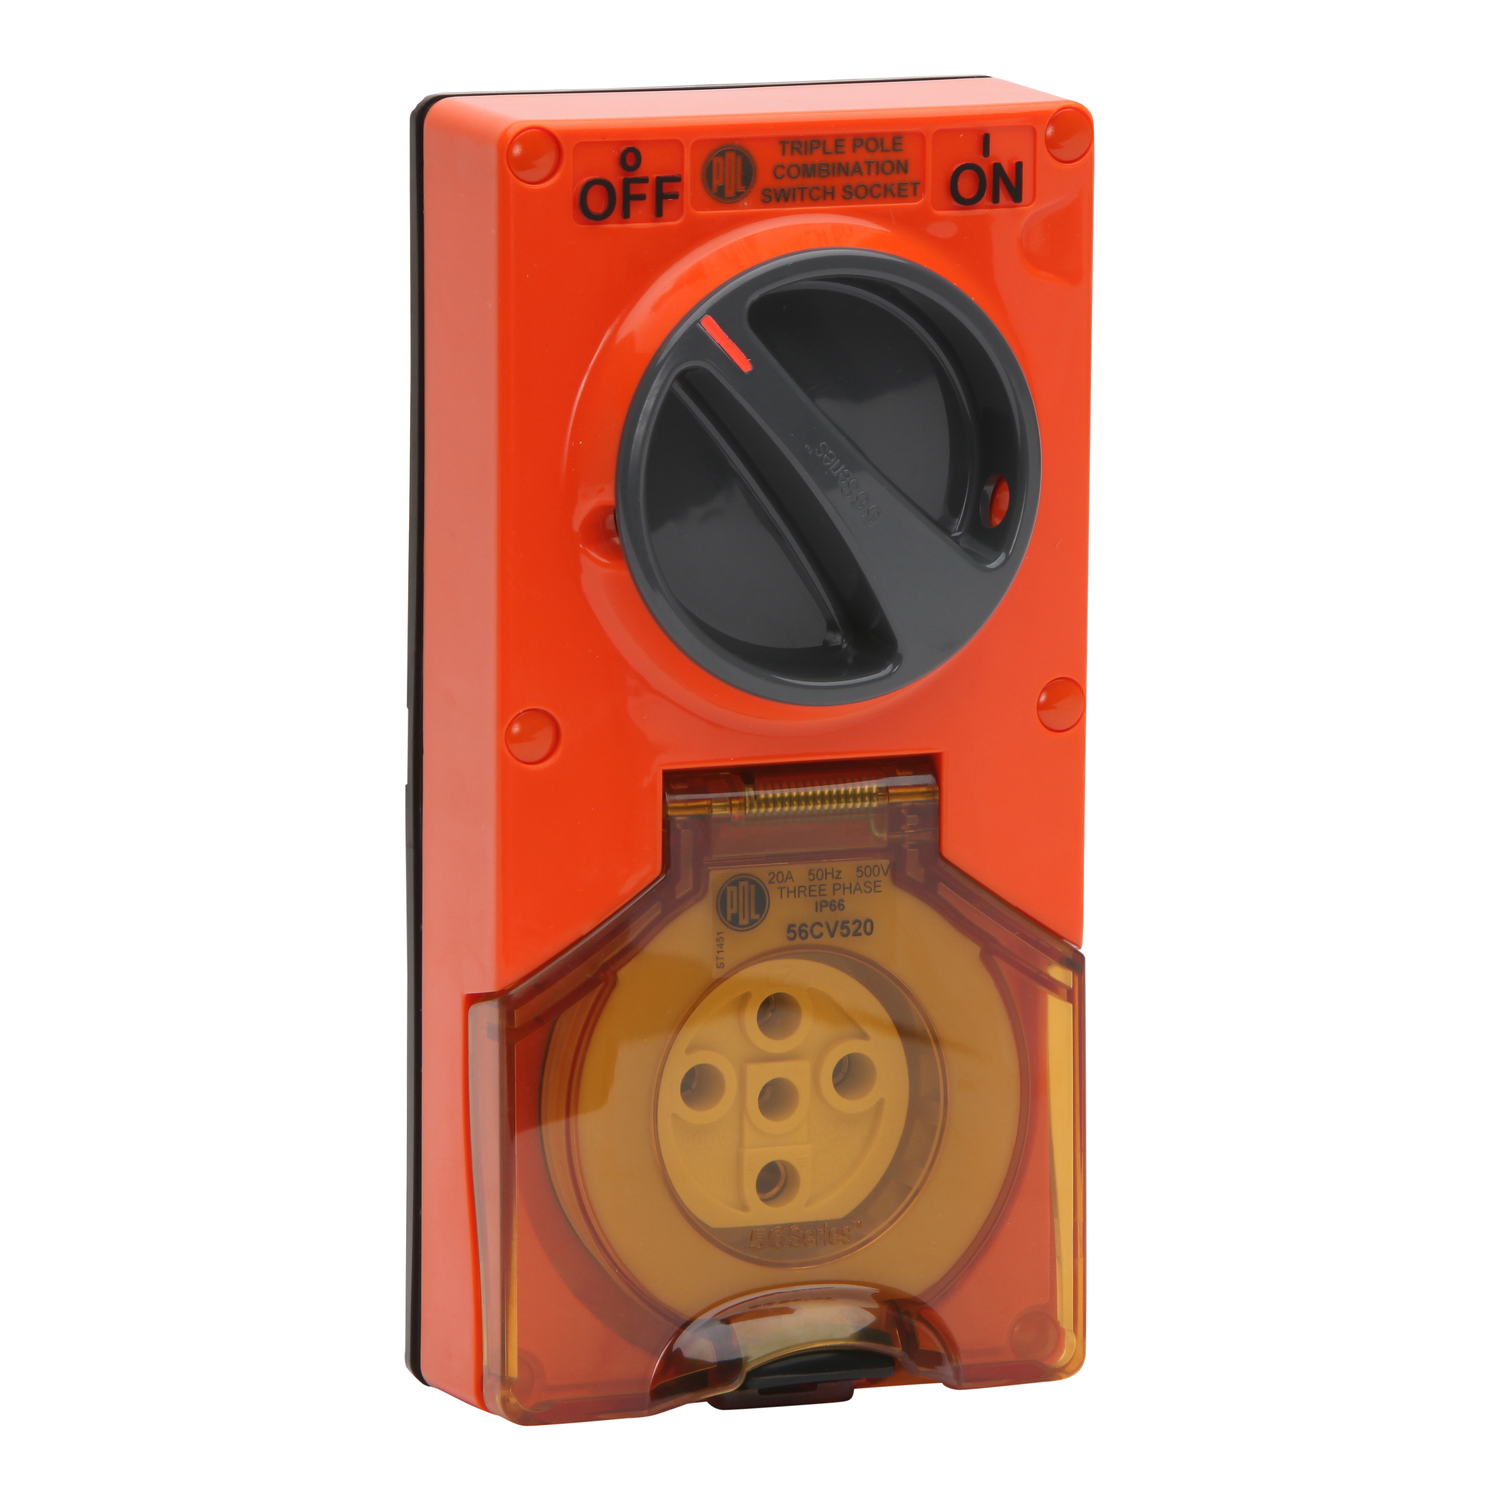 PDL 56 Series - Switched Socket 20A 500V 5-Round Pin 2-Gang 3-Pole IP66 - Chemical-Resistant Orange